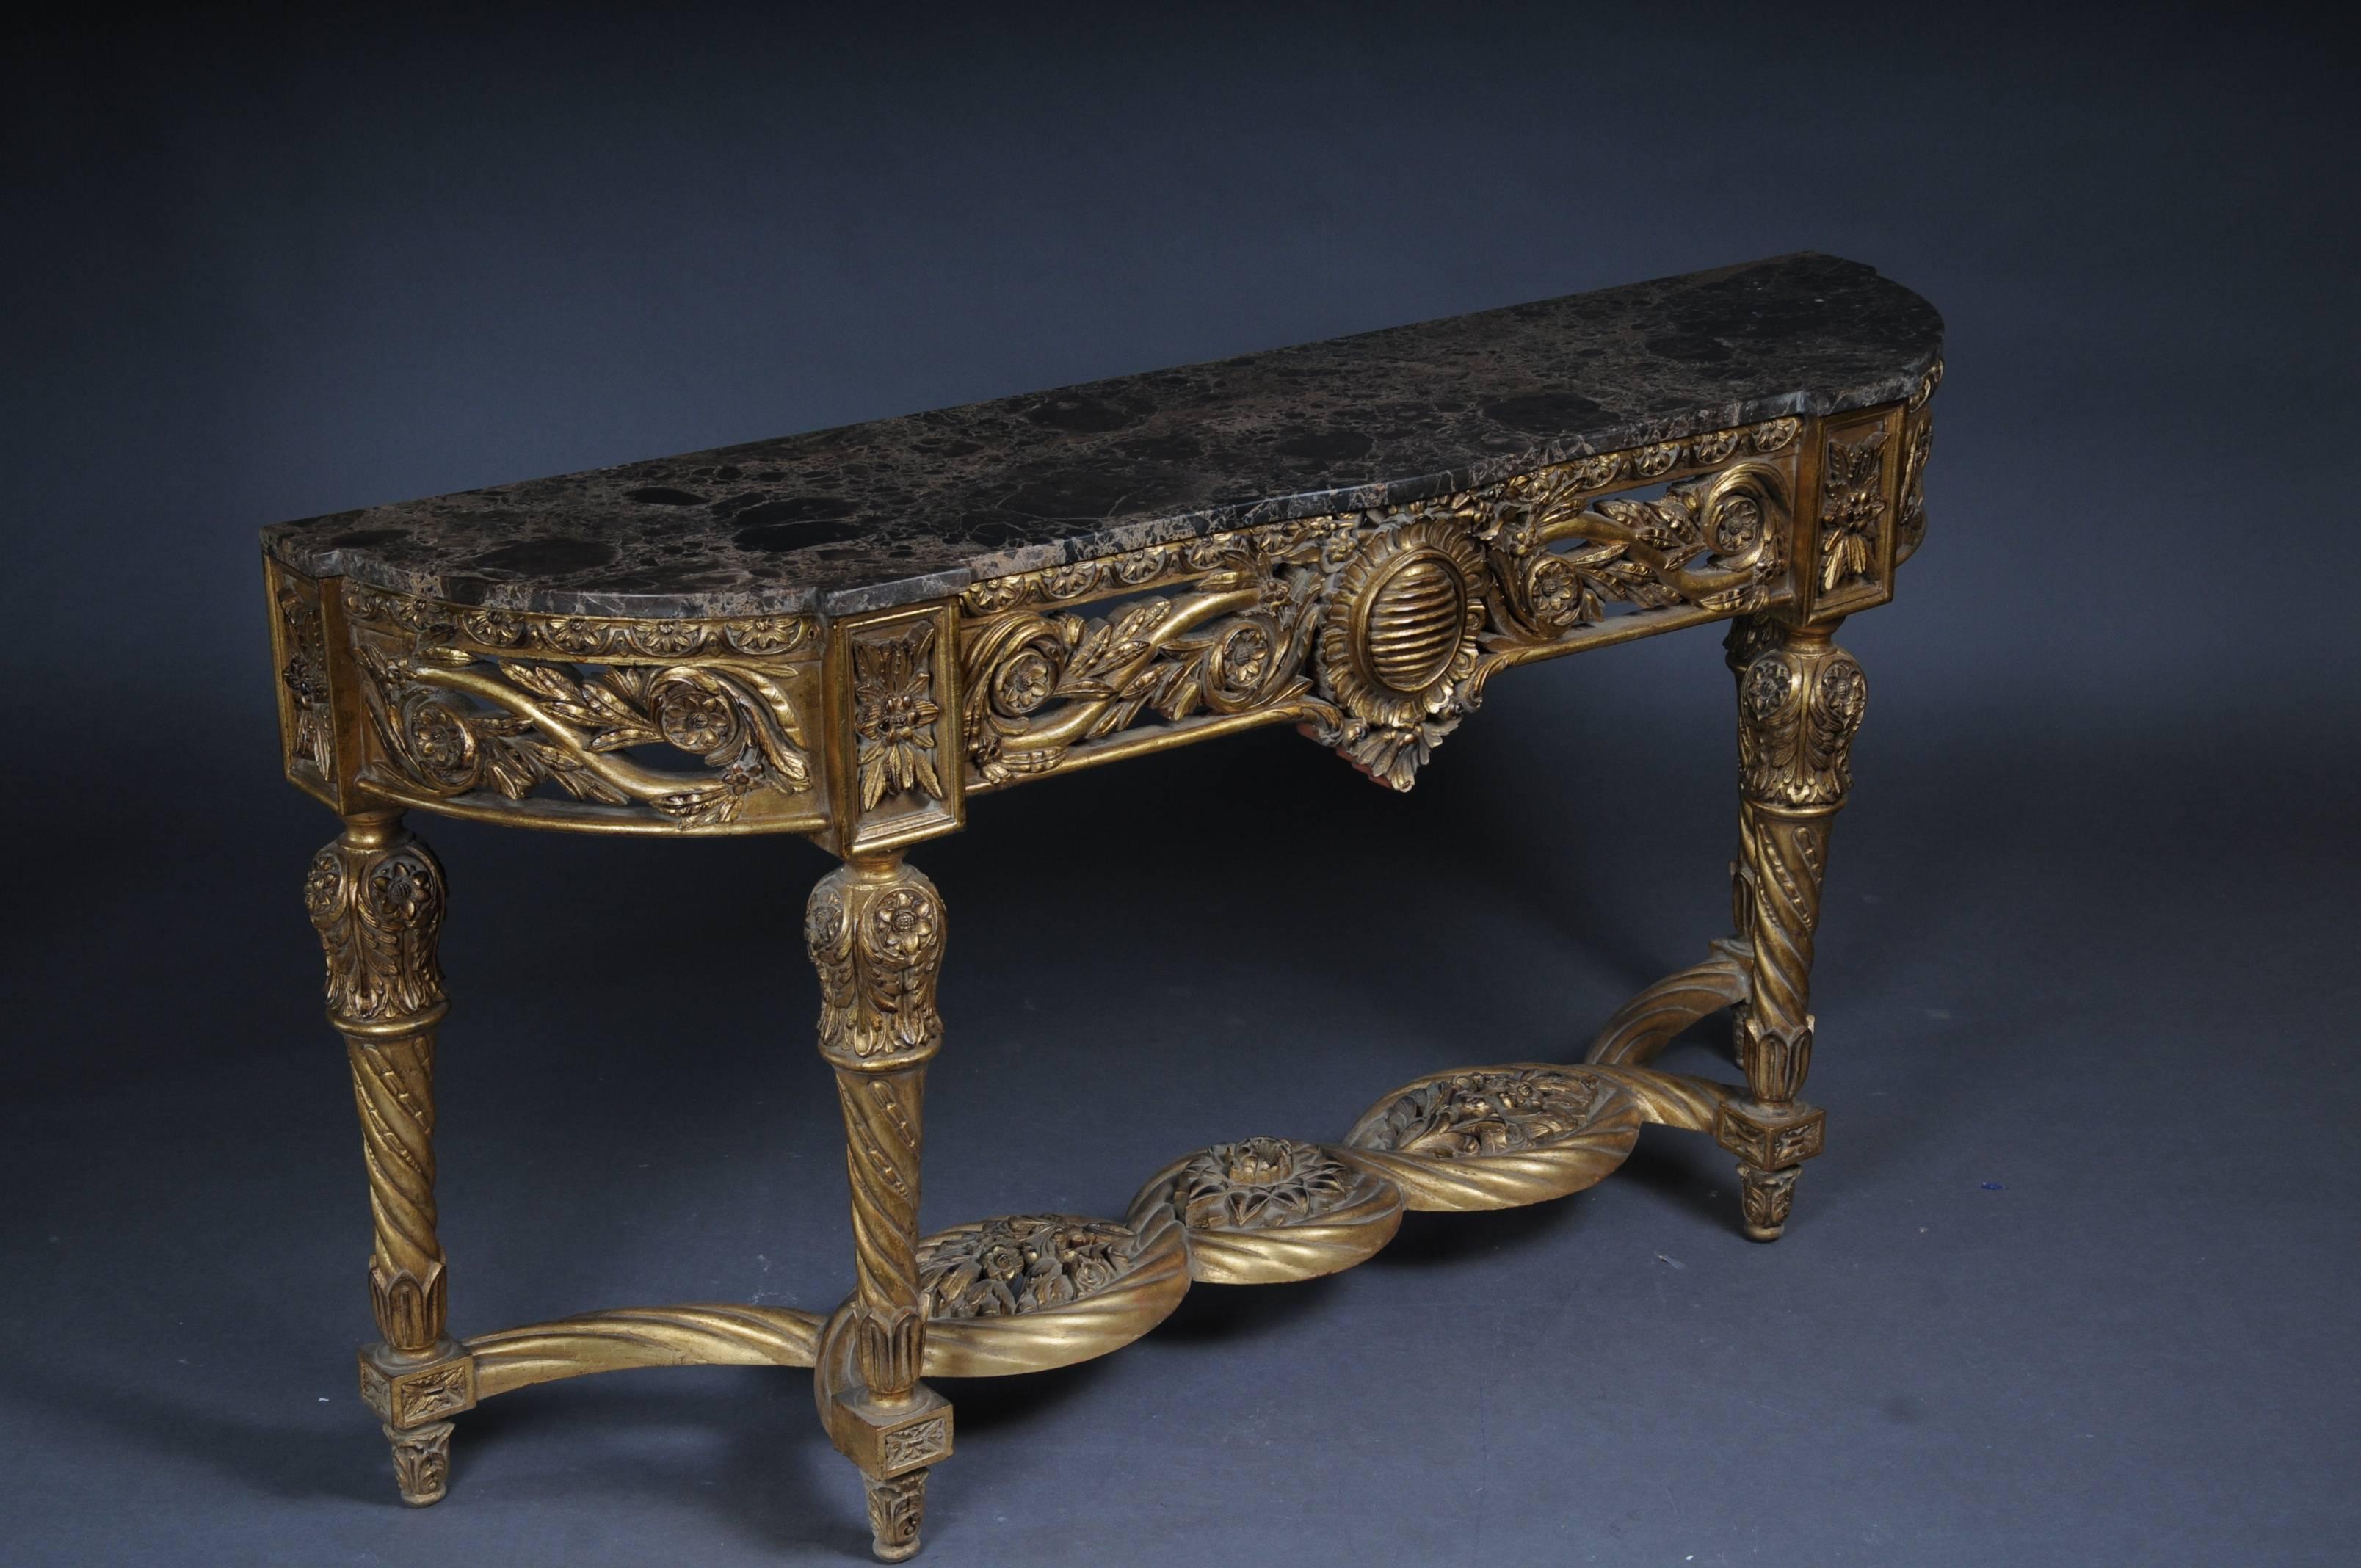 Solid beechwood, finely carved and gilded. On high slanted volute-like rolled feet connected with crossed richly carved middle bridge. Scalloped side frame. Overhanging mottled marble slab. Rich gable-like openwork rocaille crowning.
On conical,